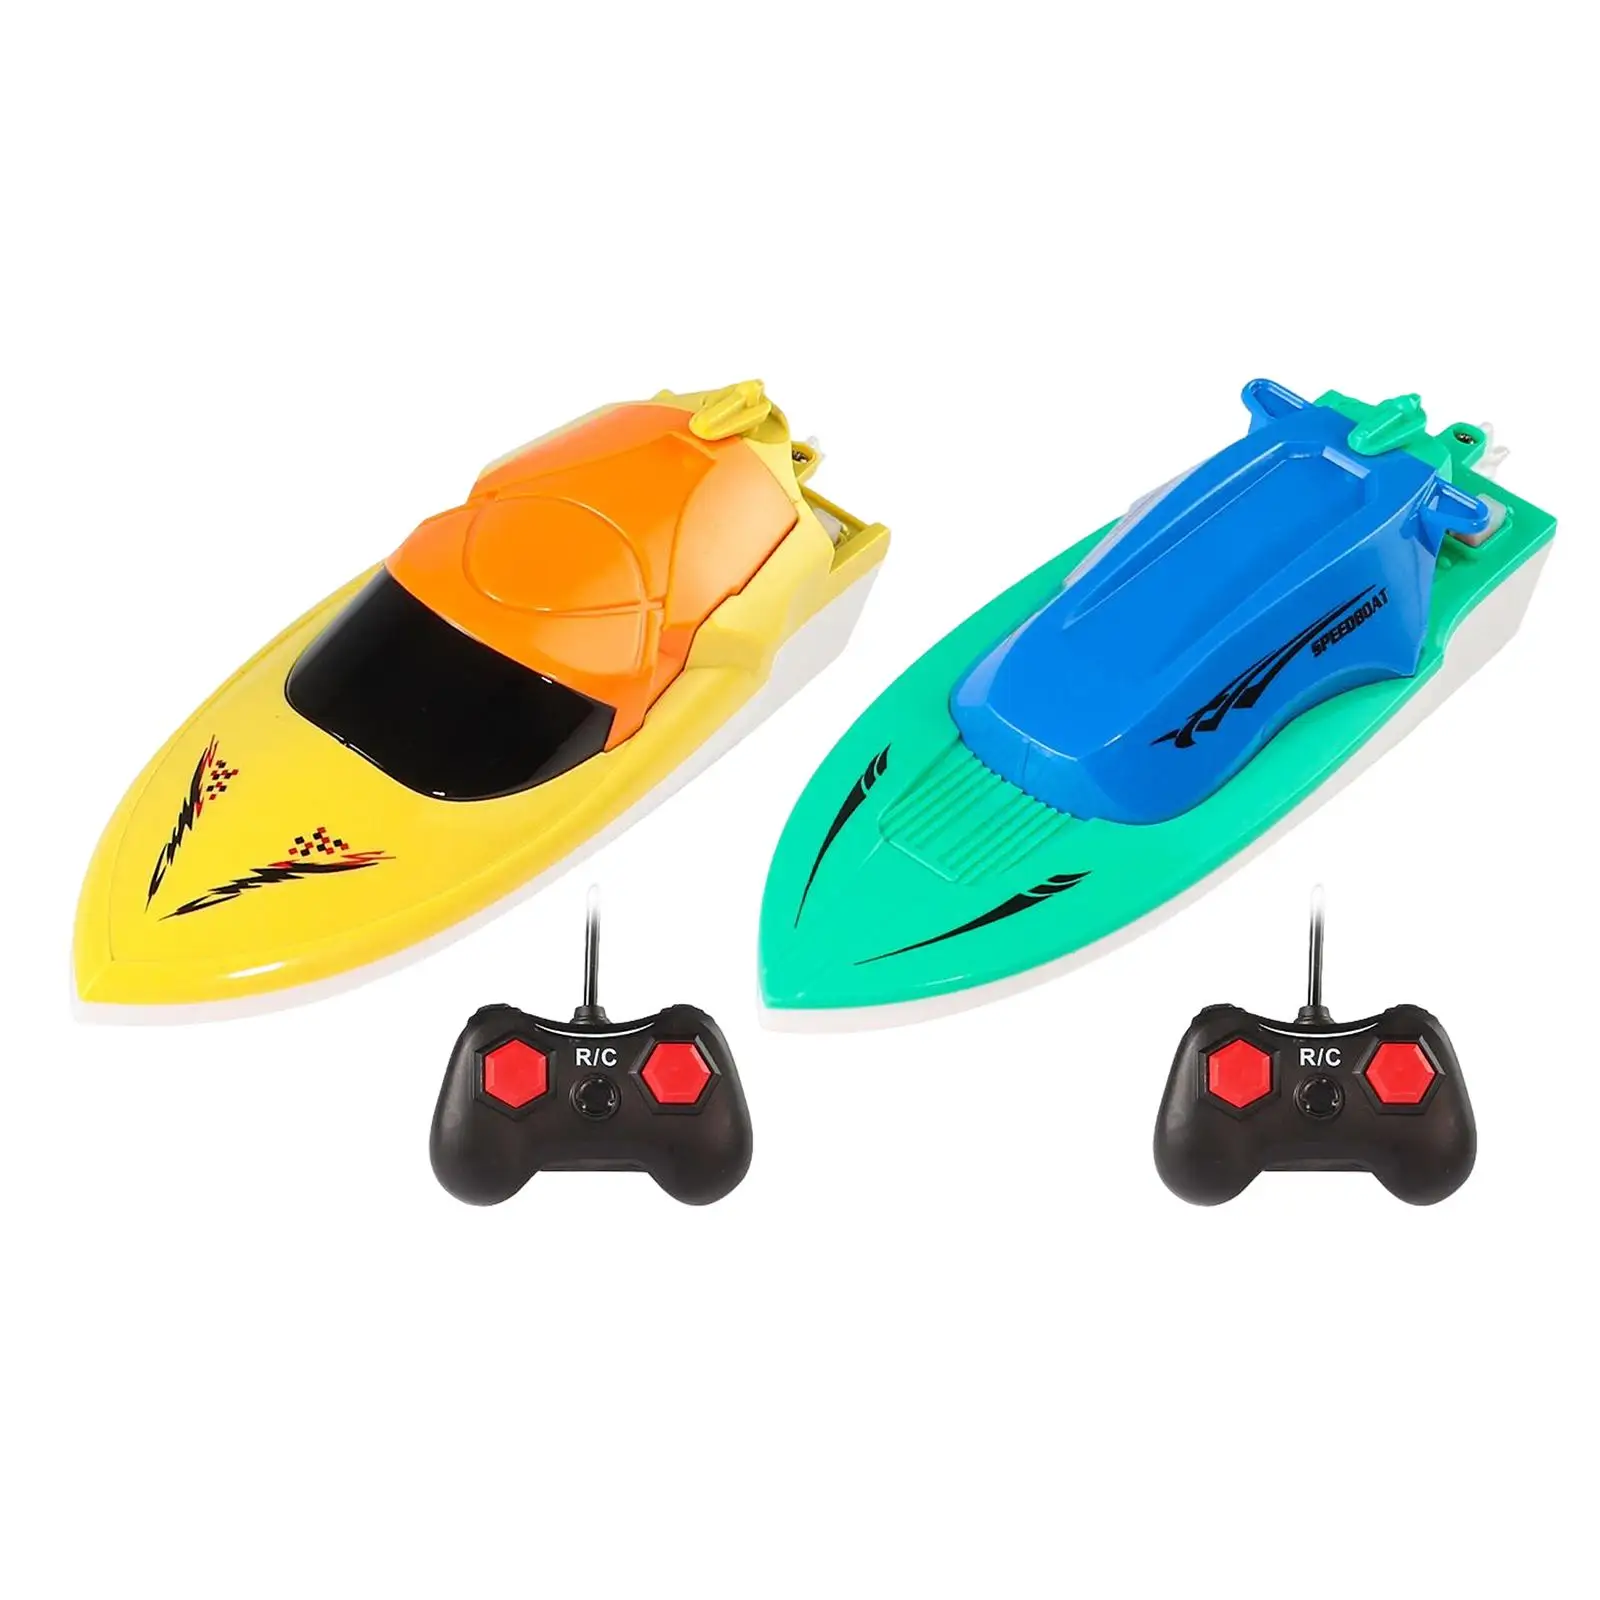 Mini Racing Boat Toy with Remote Control , Easily Forward, Reverse, Turn Left, and Turn Right Anti Collision Body Sturdy Durable